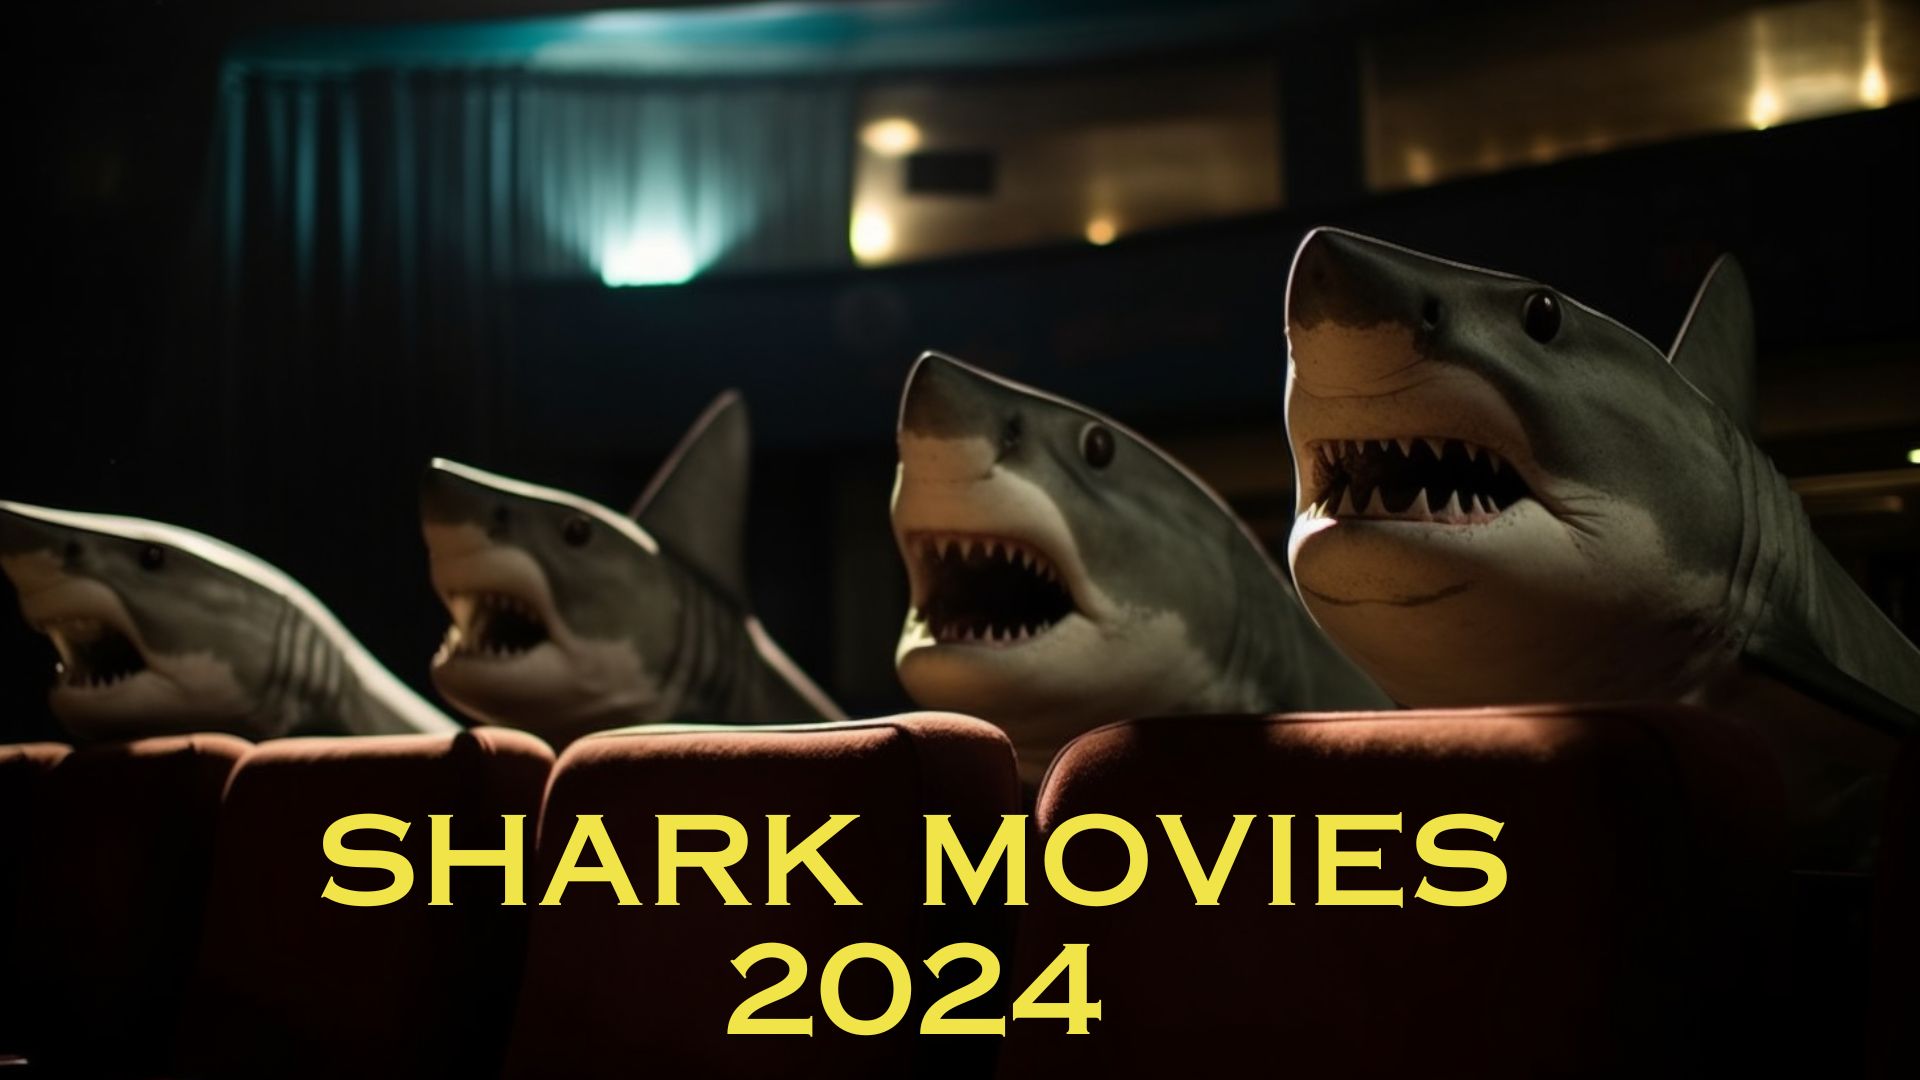 Shark Movies coming in 2024